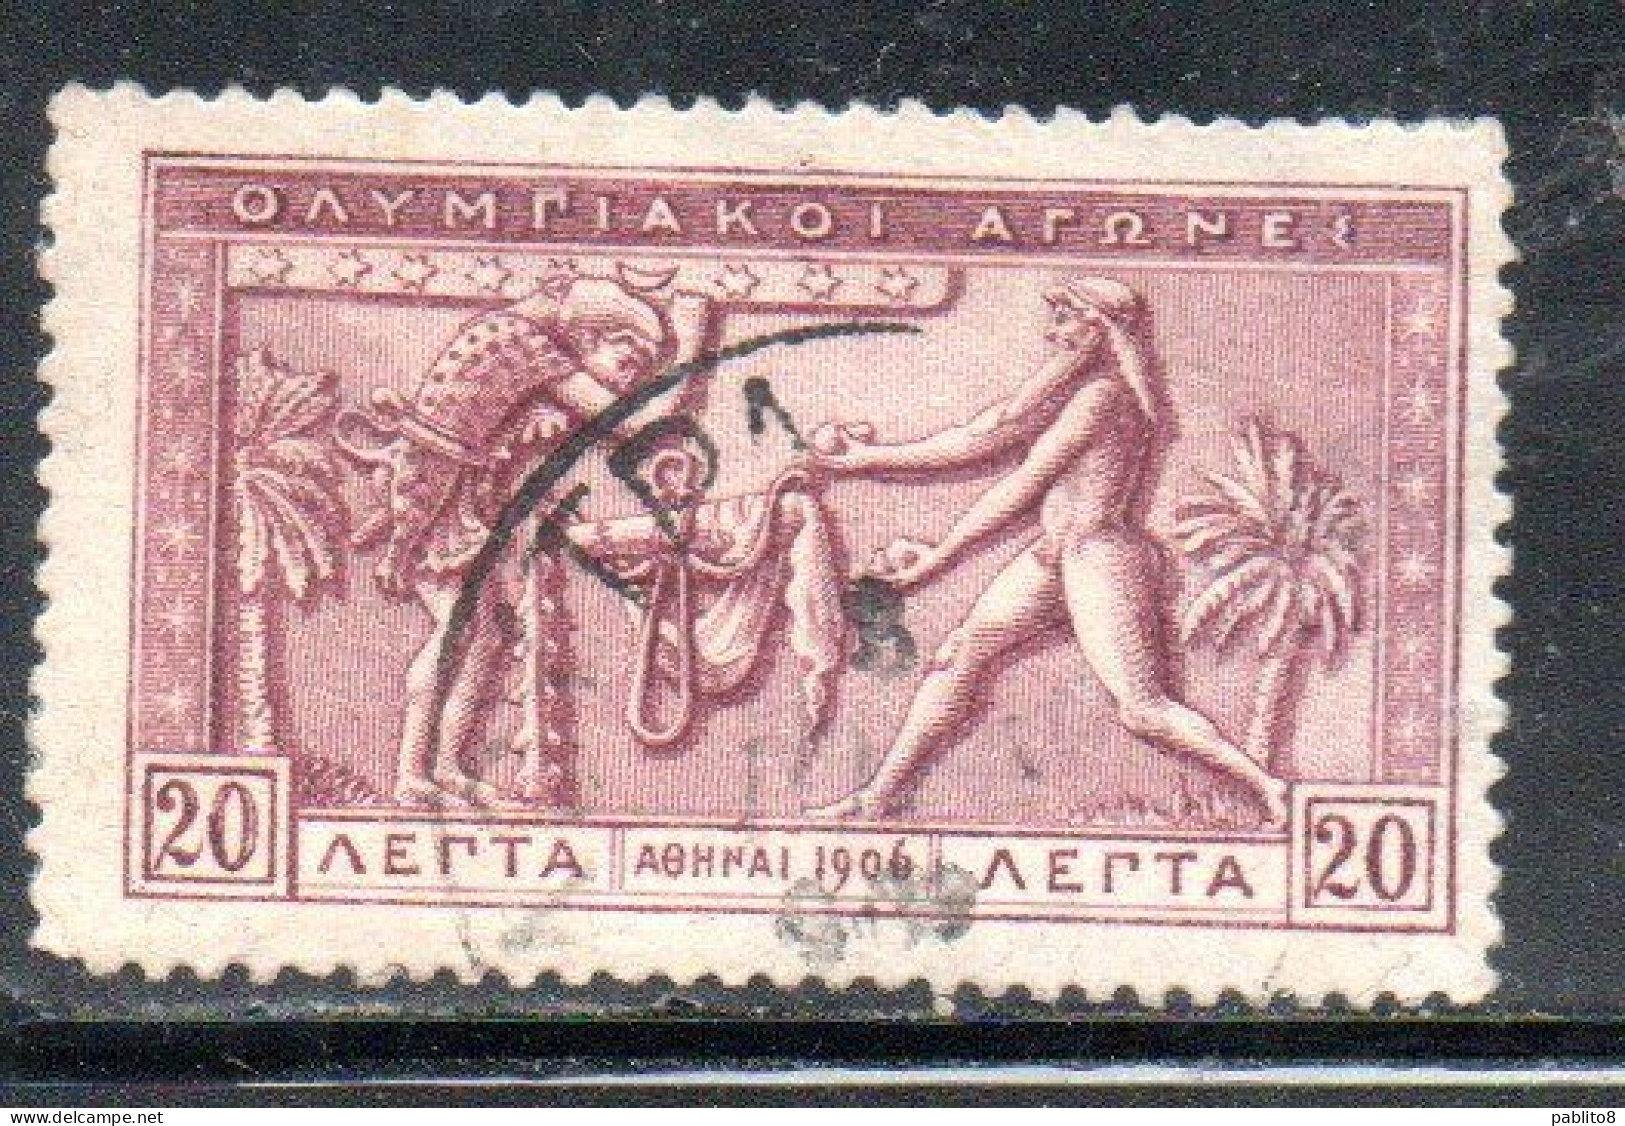 GREECE GRECIA ELLAS 1906 GREEK SPECIAL OLYMPIC GAMES ATHENS ATLAS AND HERCULES 20l USED USATO OBLITERE' - Used Stamps